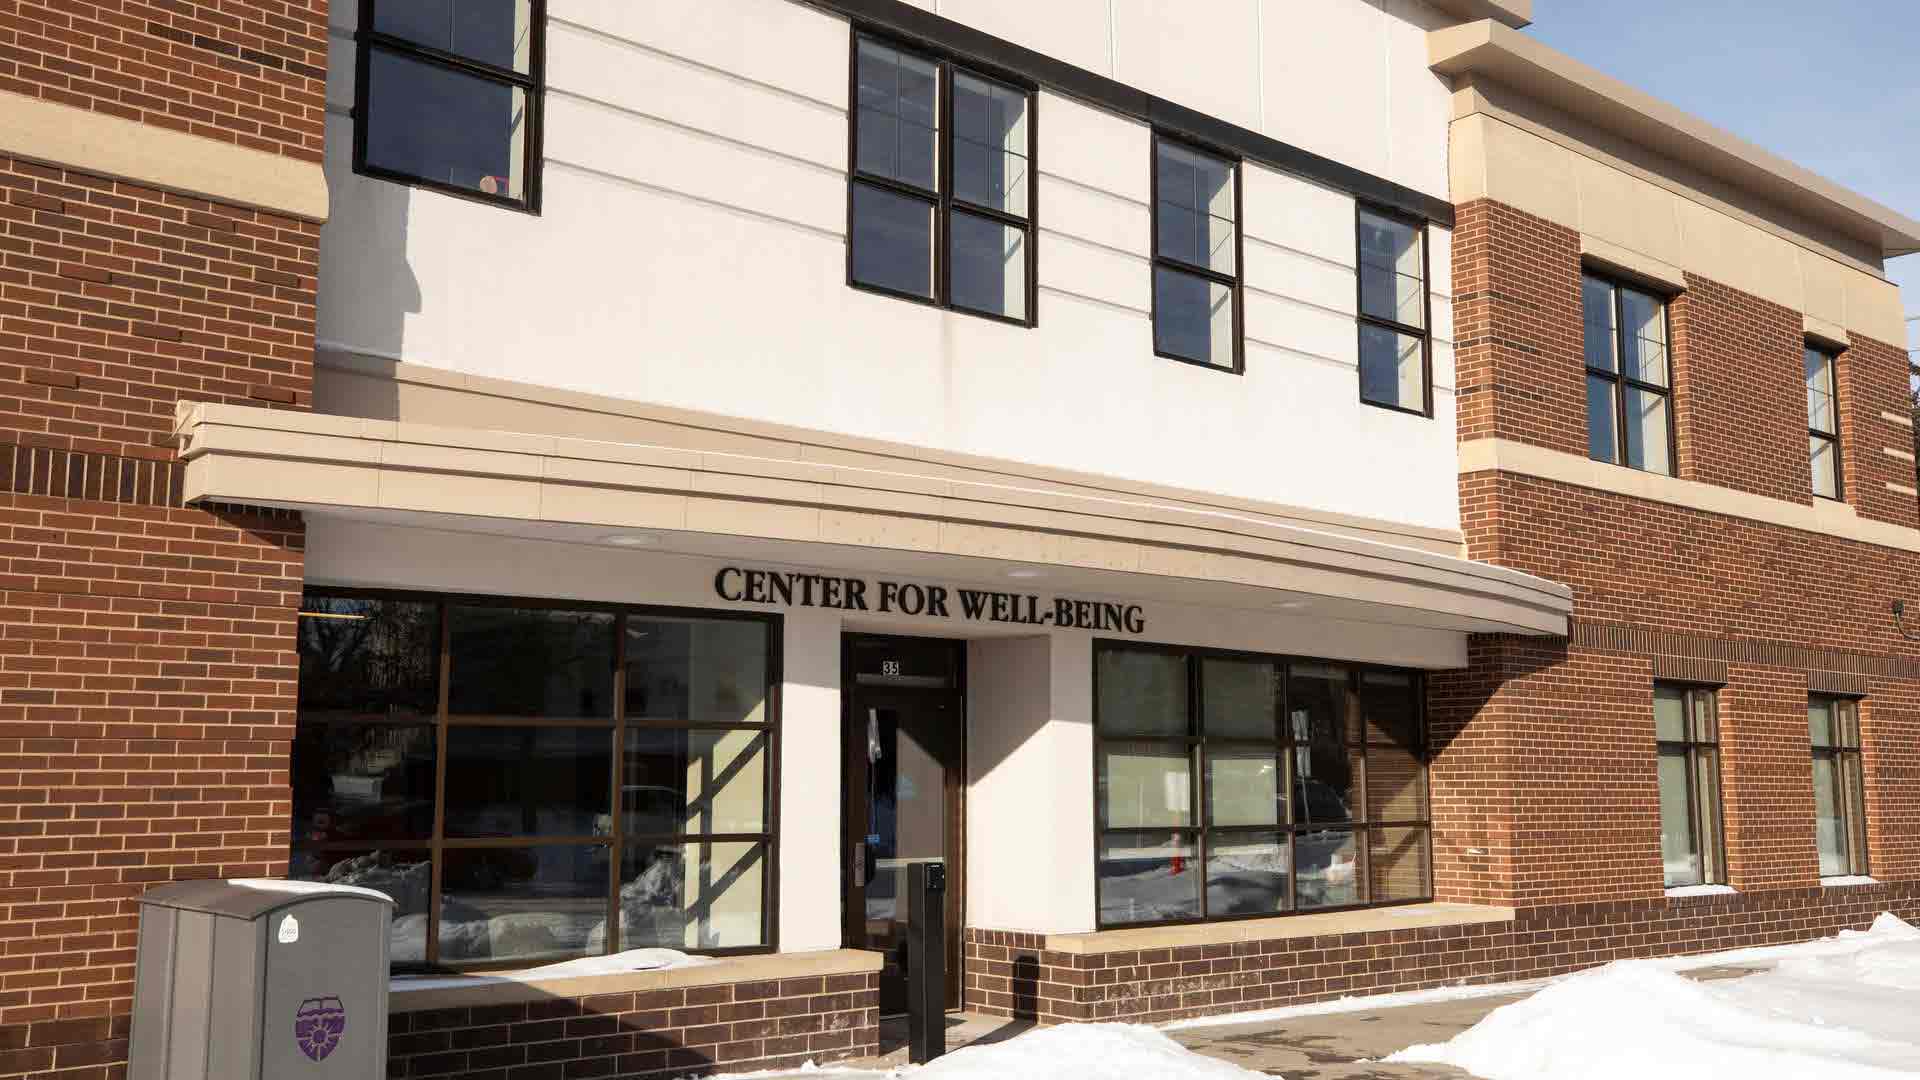 Photo of the Center for Well-Being